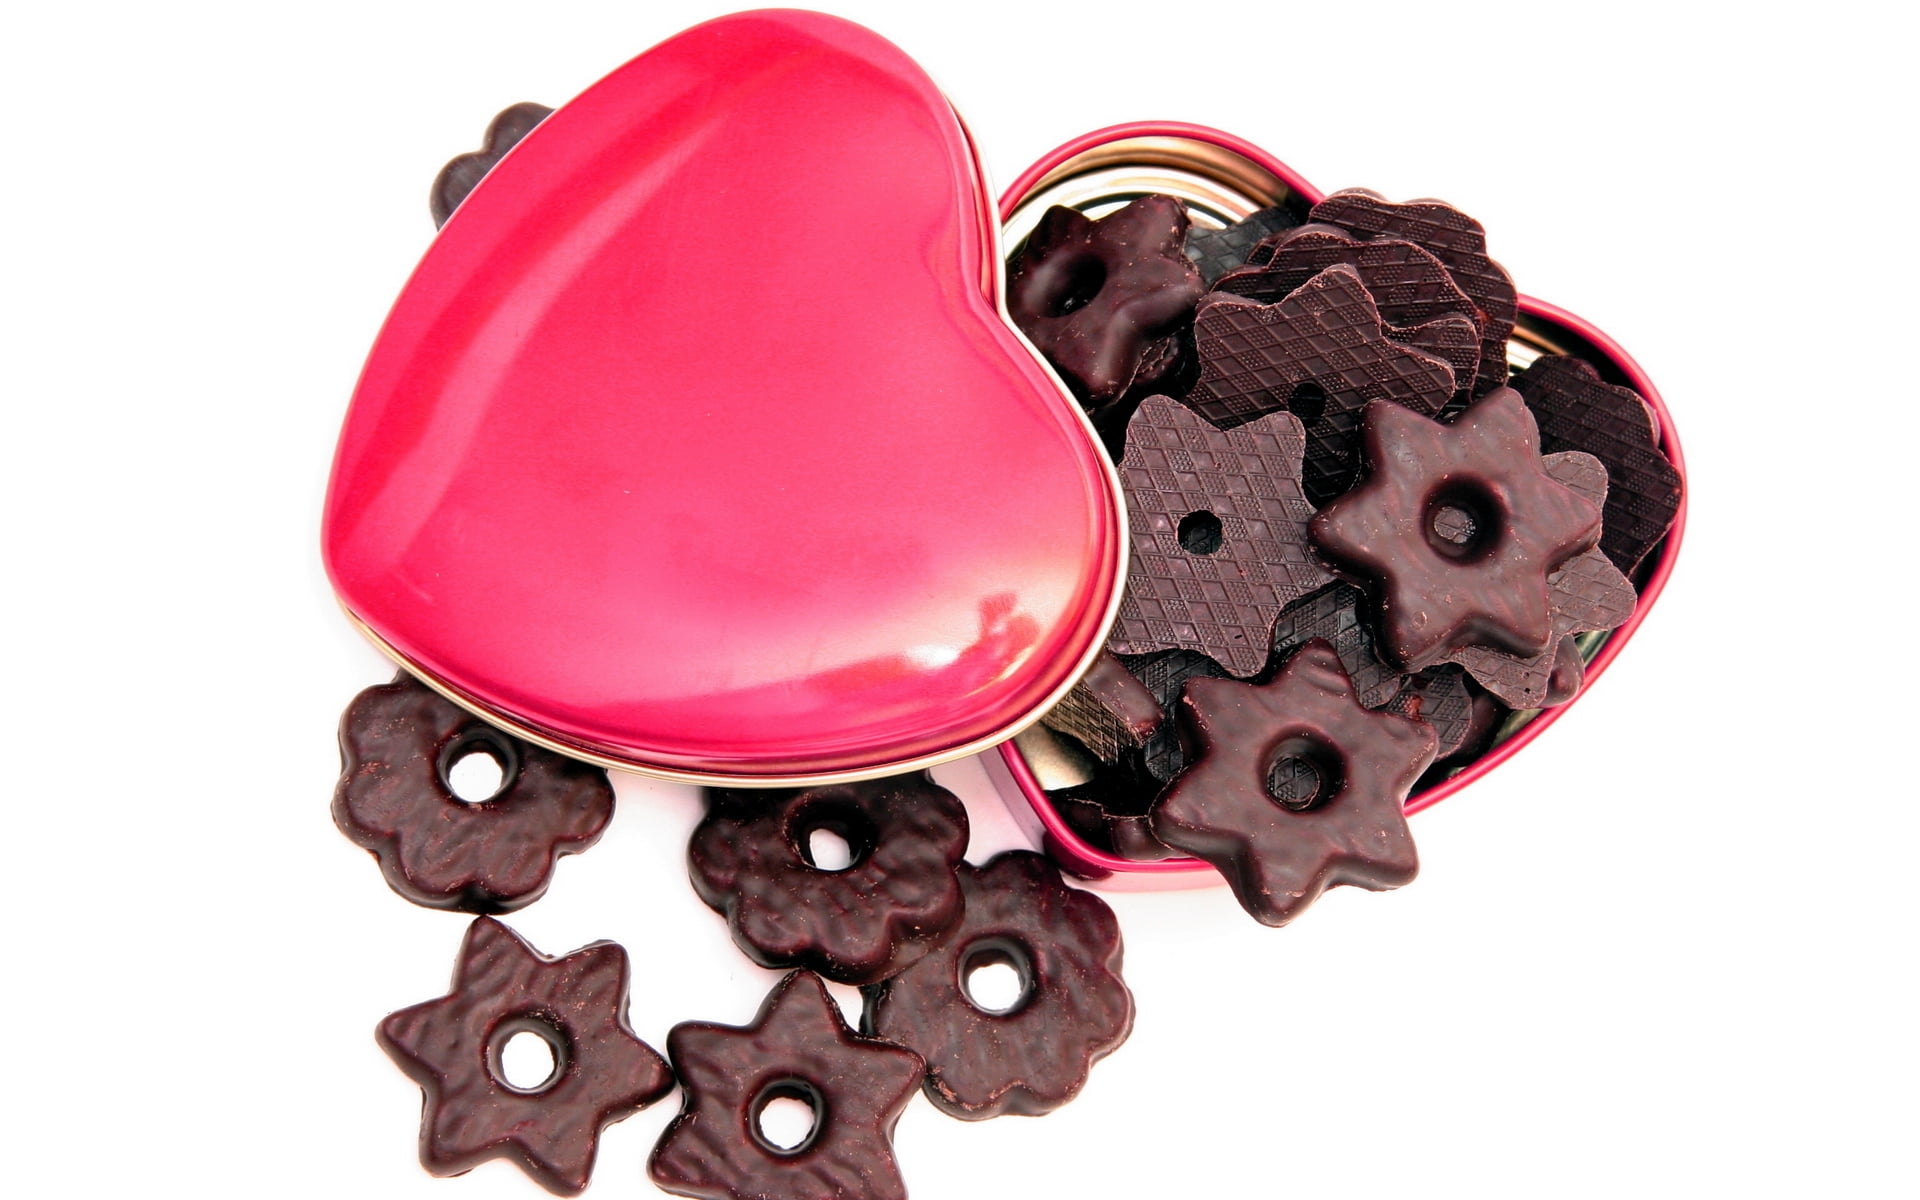 brown chocolate coated biscuits on red heart-shaped container